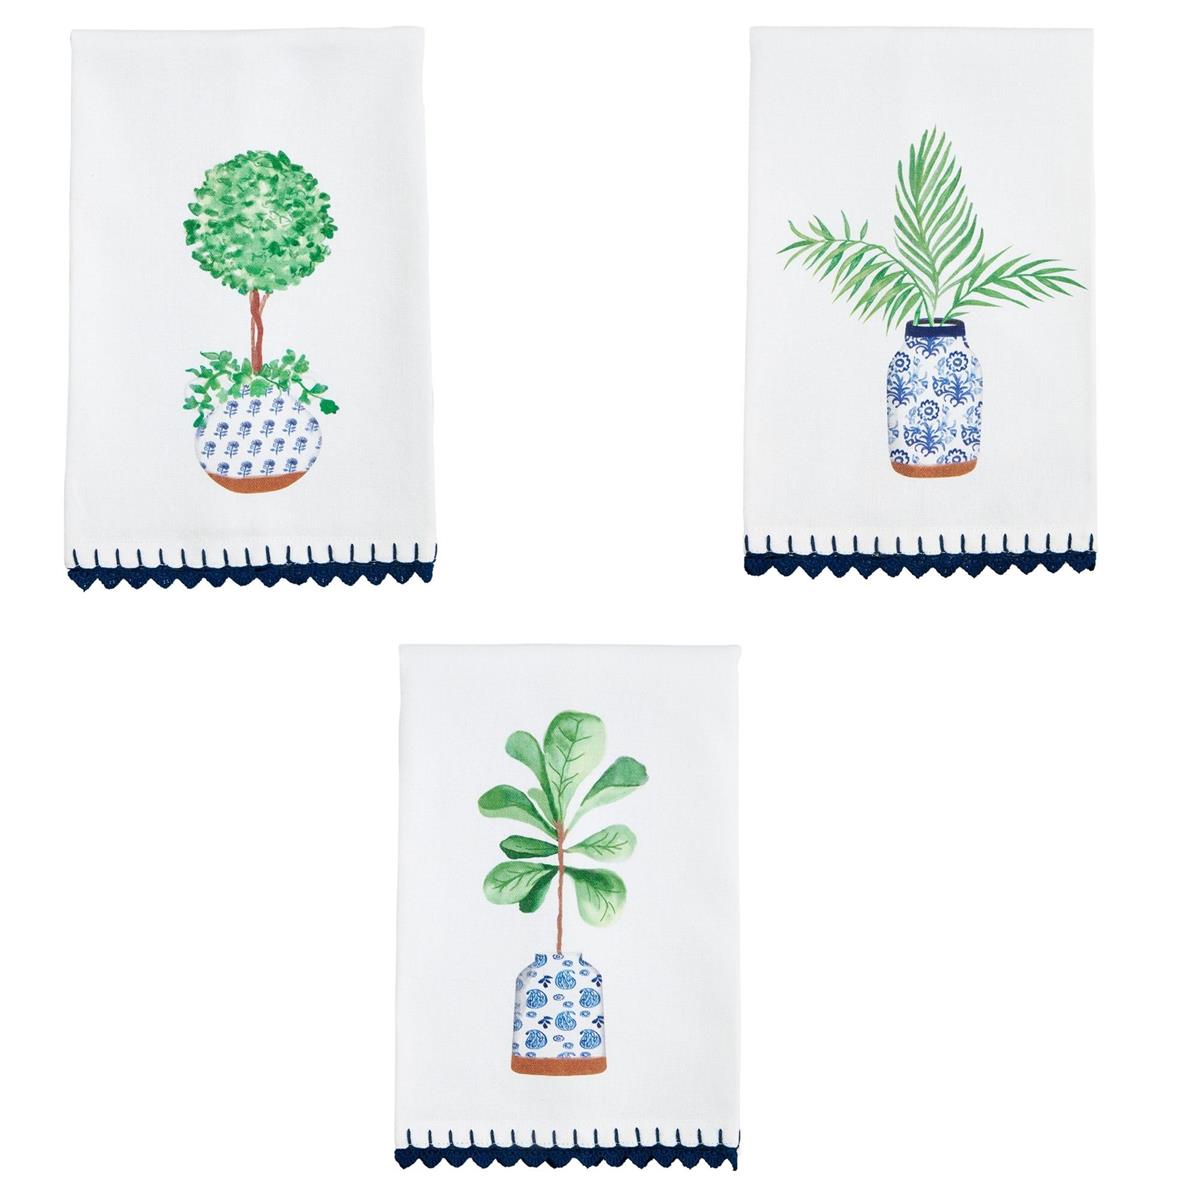 3 styles of potted plant hand towels on a white bakcground.